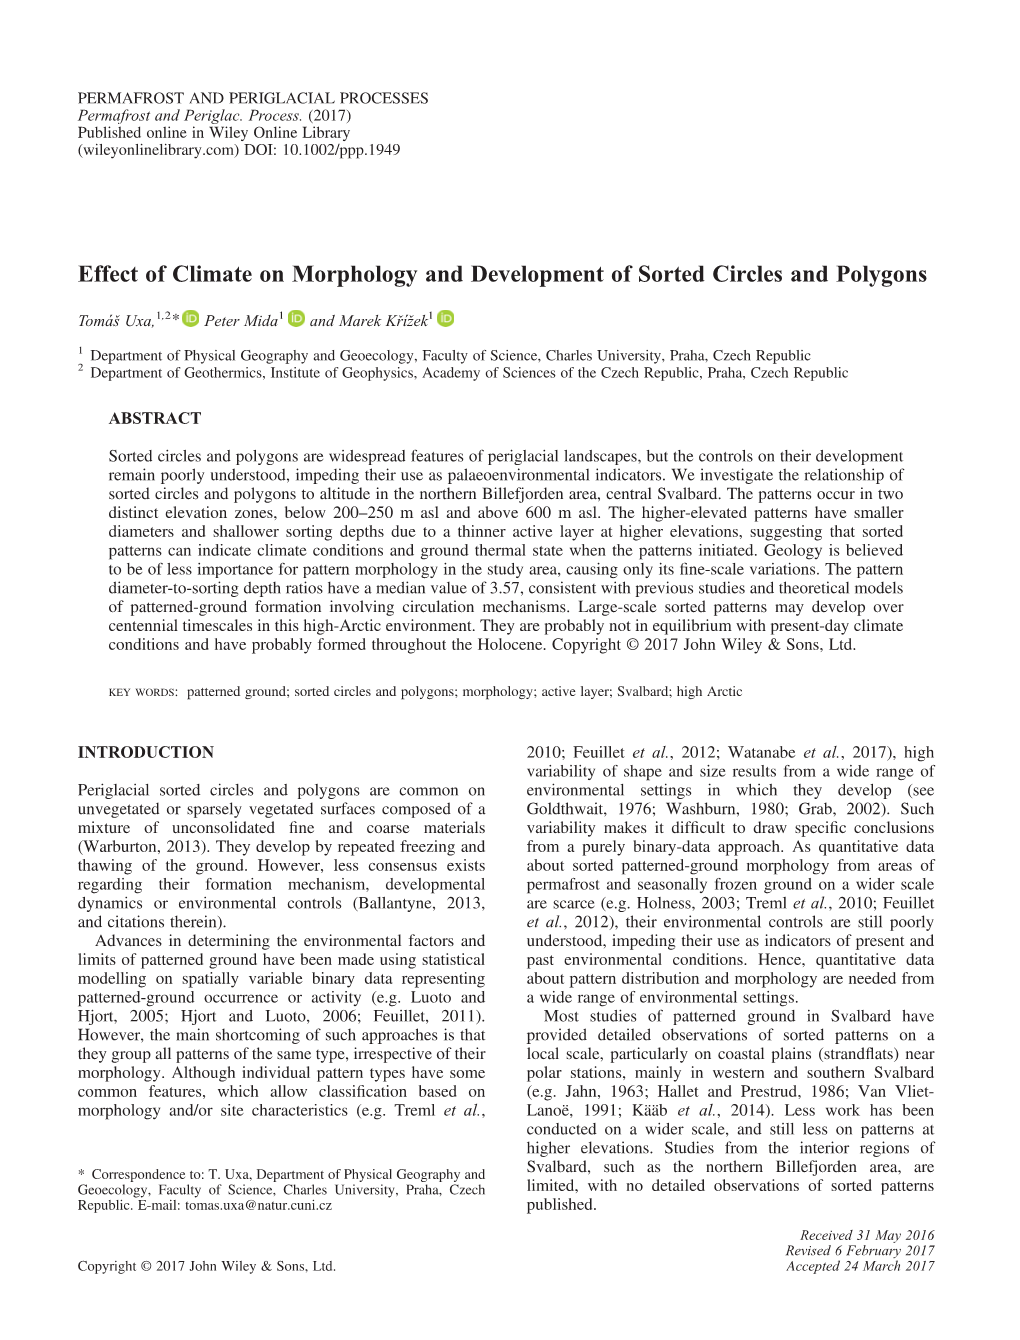 Effect of Climate on Morphology and Development of Sorted Circles and Polygons